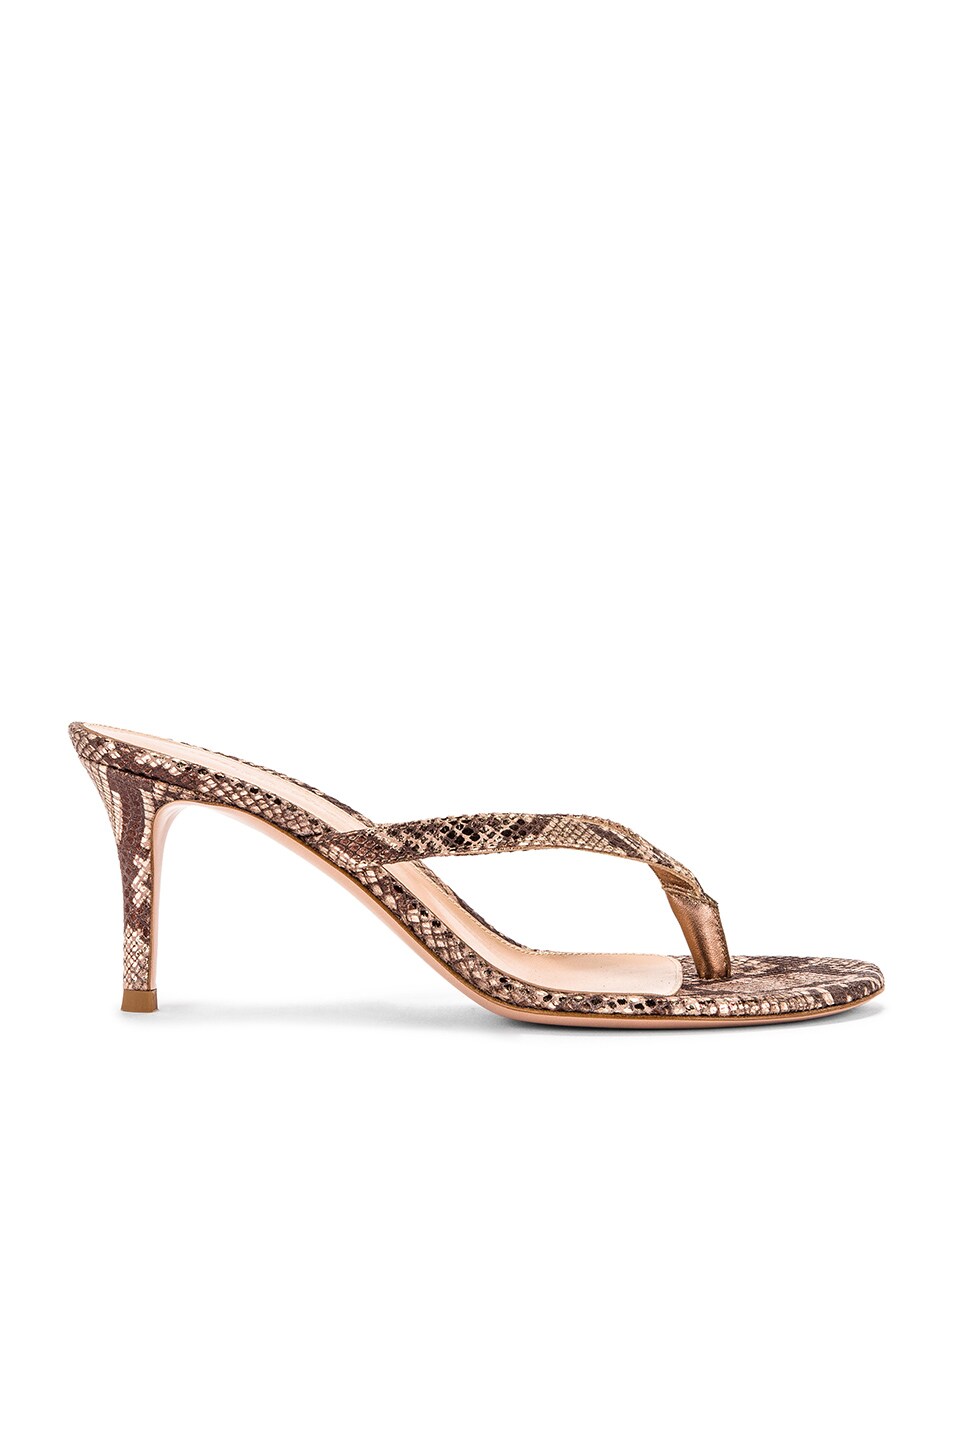 Image 1 of Gianvito Rossi Dallas Thong Sandals in Praline